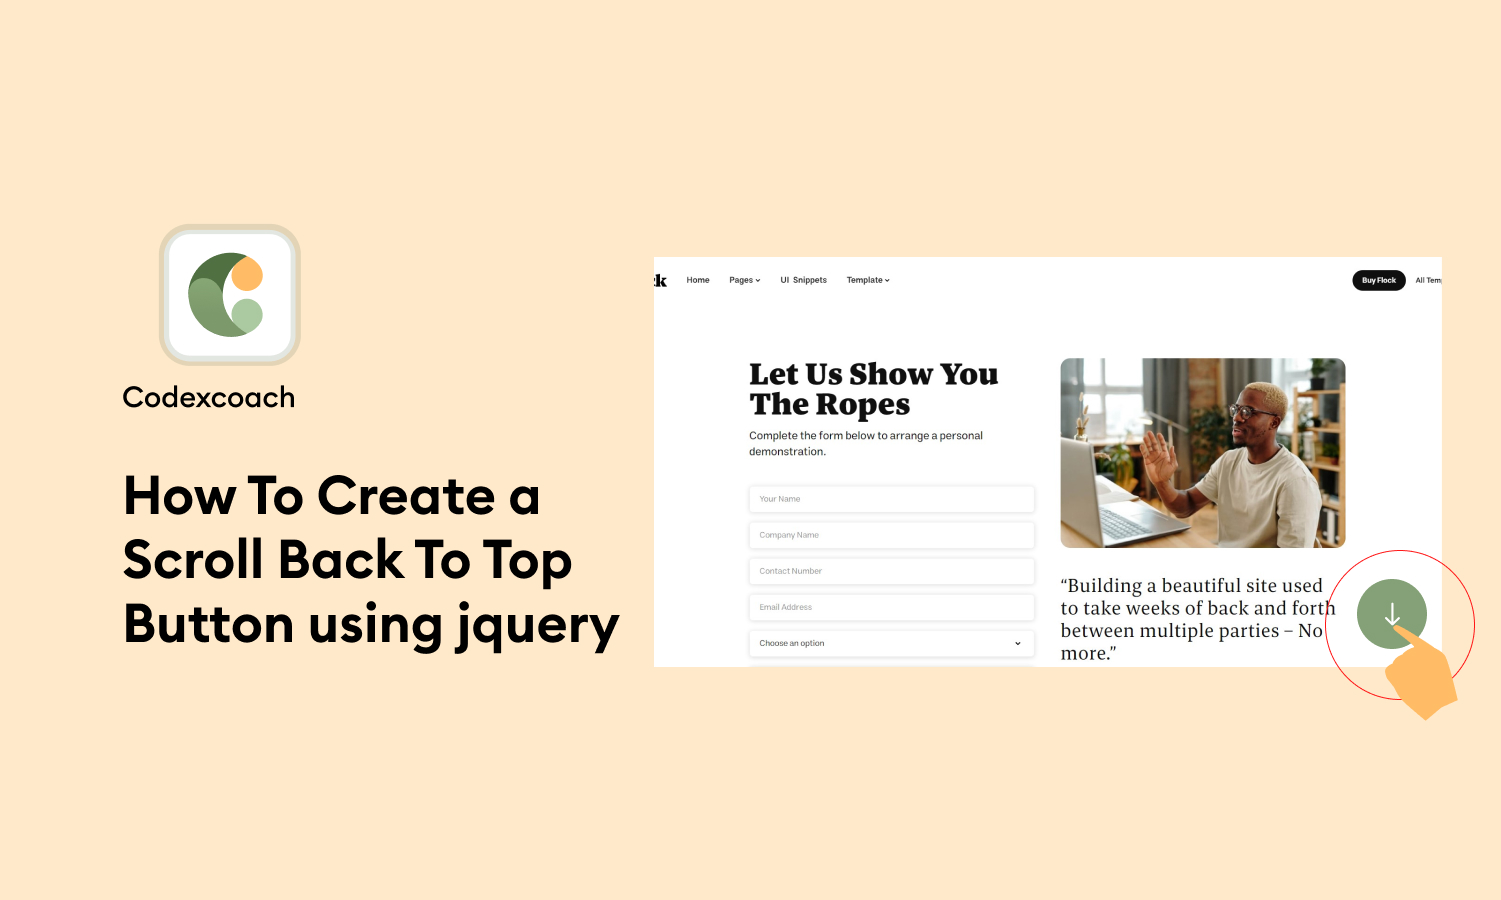 How To Create a Scroll Back To Top Button using jquery